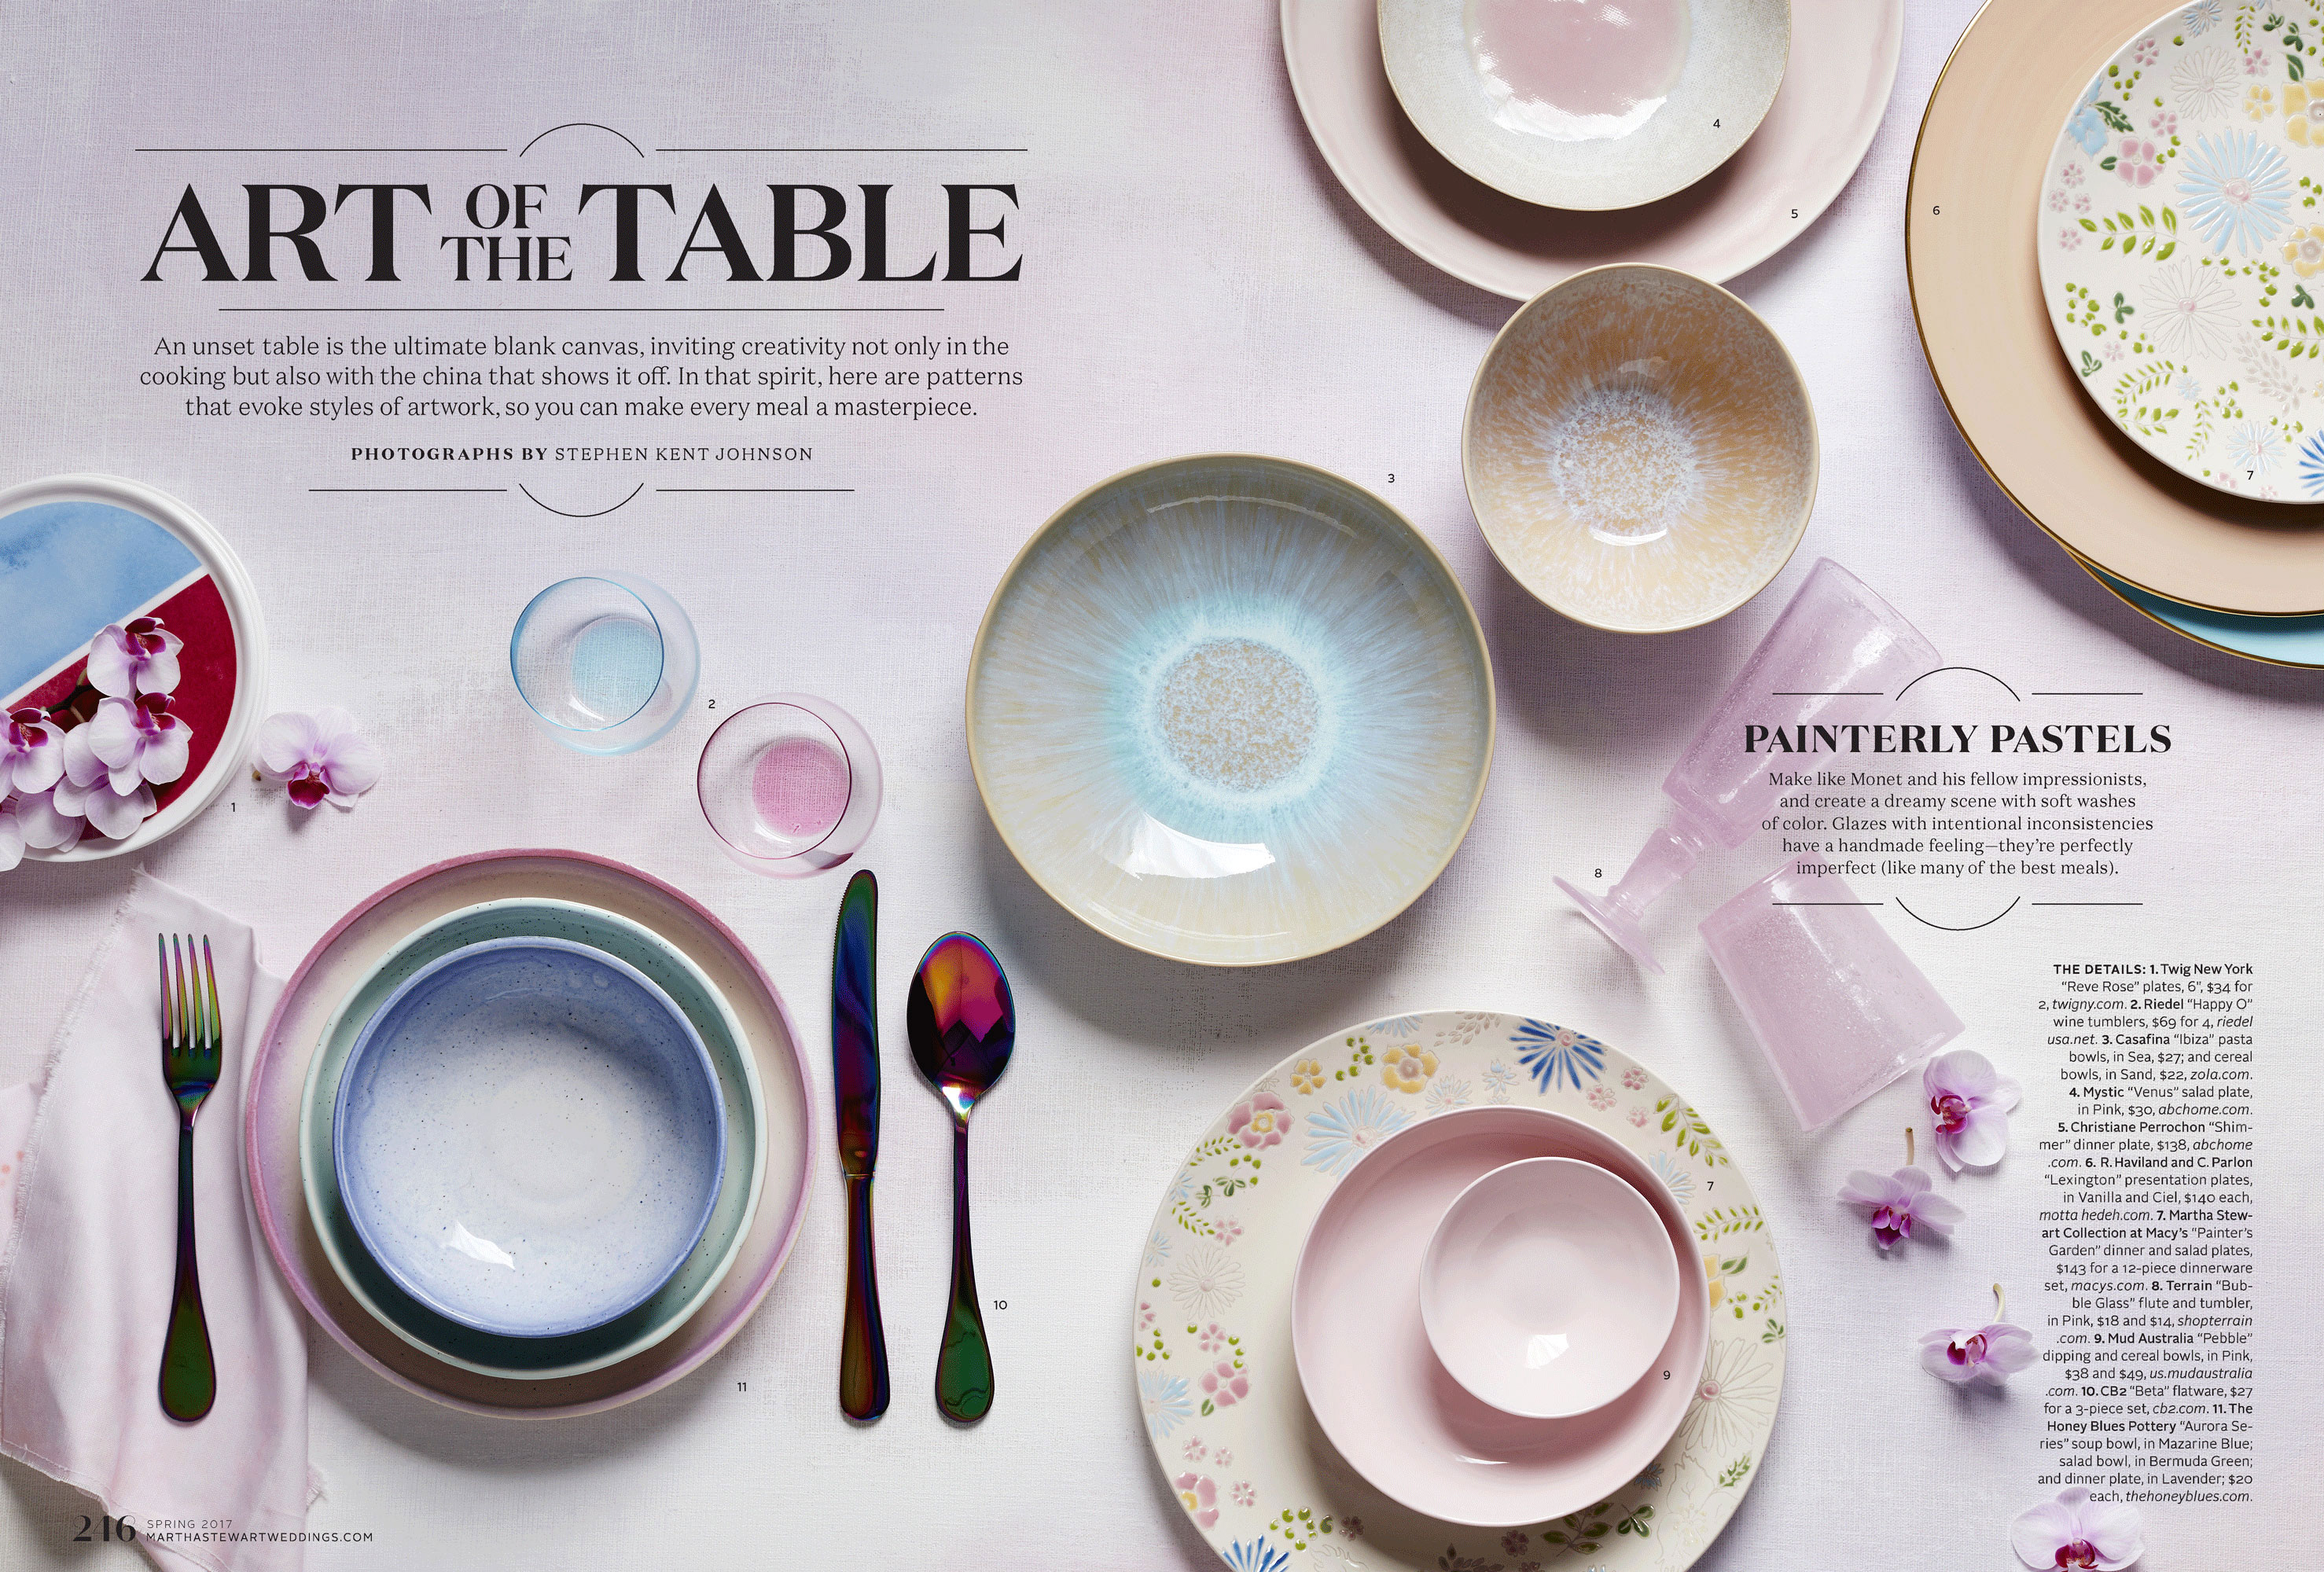 Art of the Table by Megan Hillman